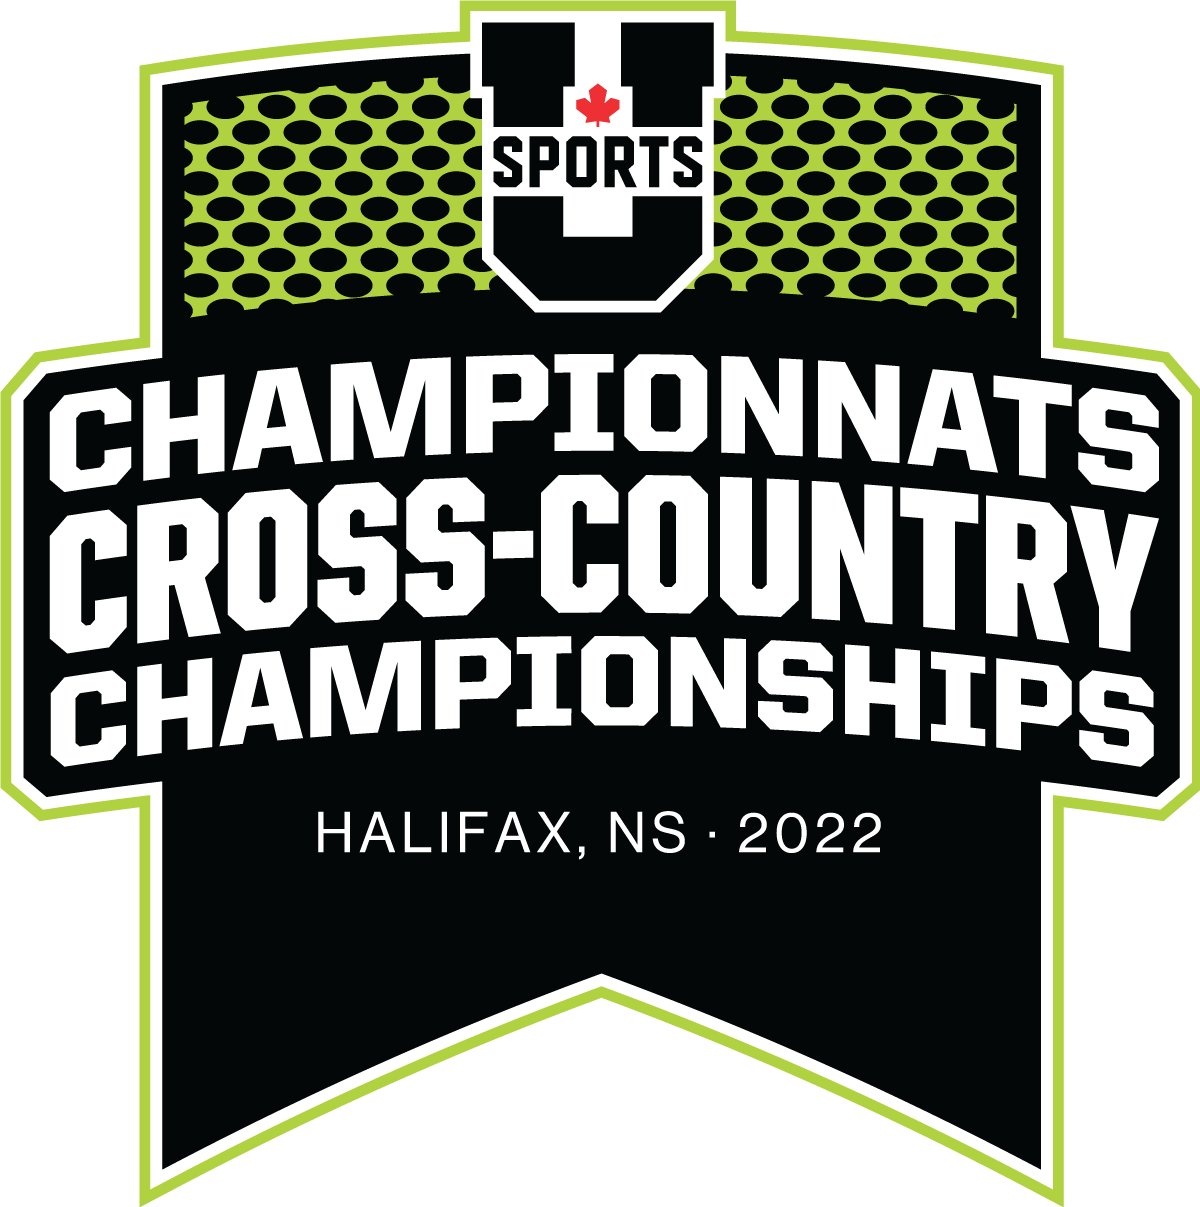 USports_Champ2223_crossCountry_Primary_CMYK_BL_(1).png (93 KB)